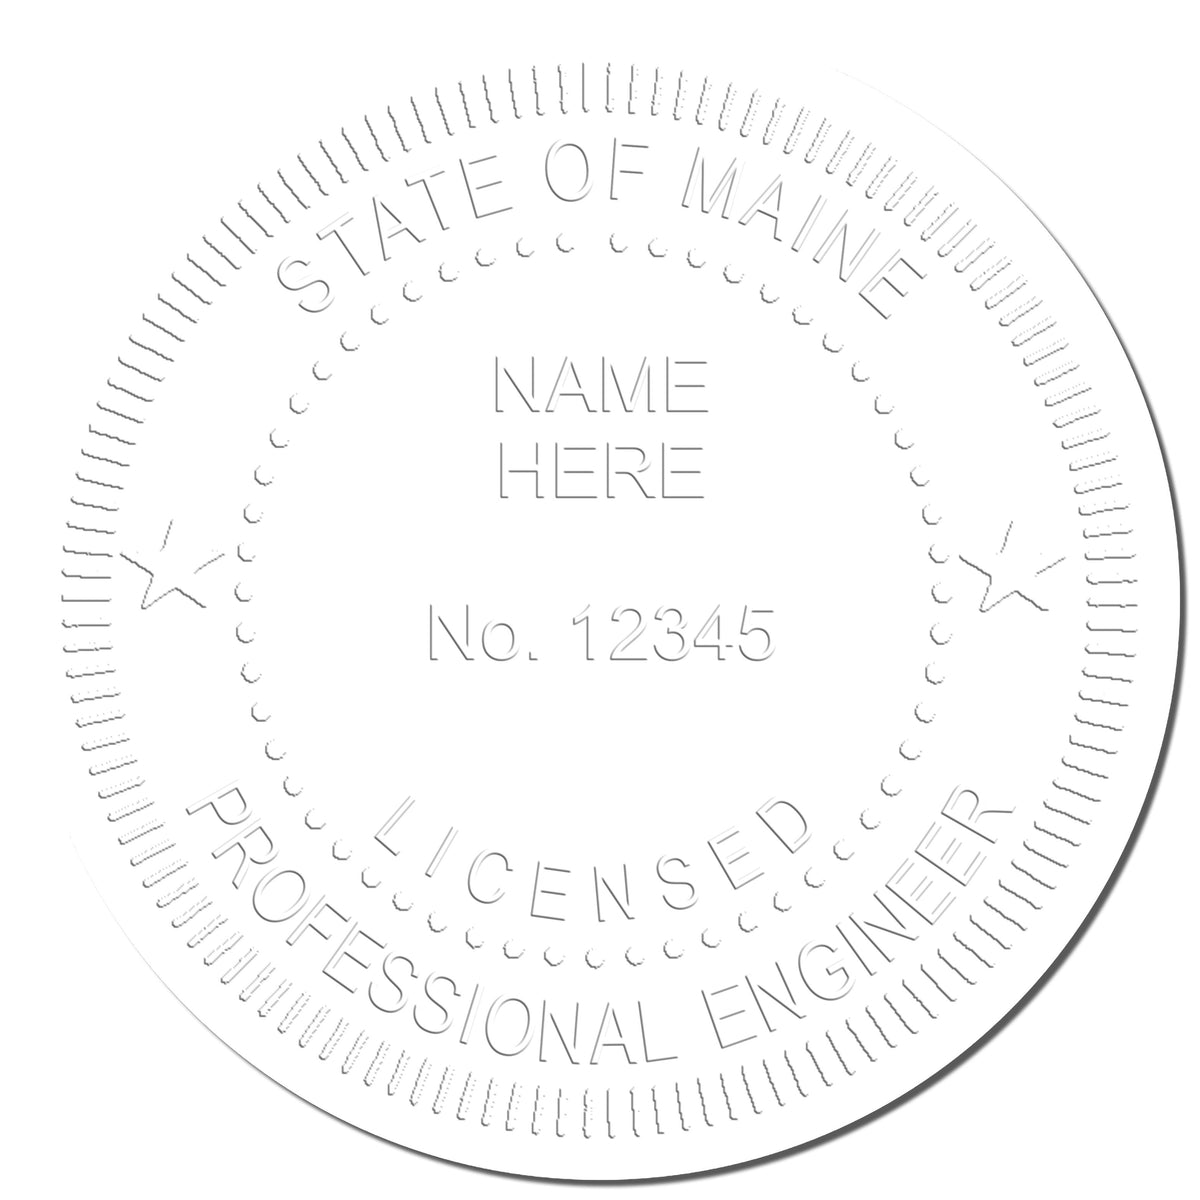 This paper is stamped with a sample imprint of the Hybrid Maine Engineer Seal, signifying its quality and reliability.